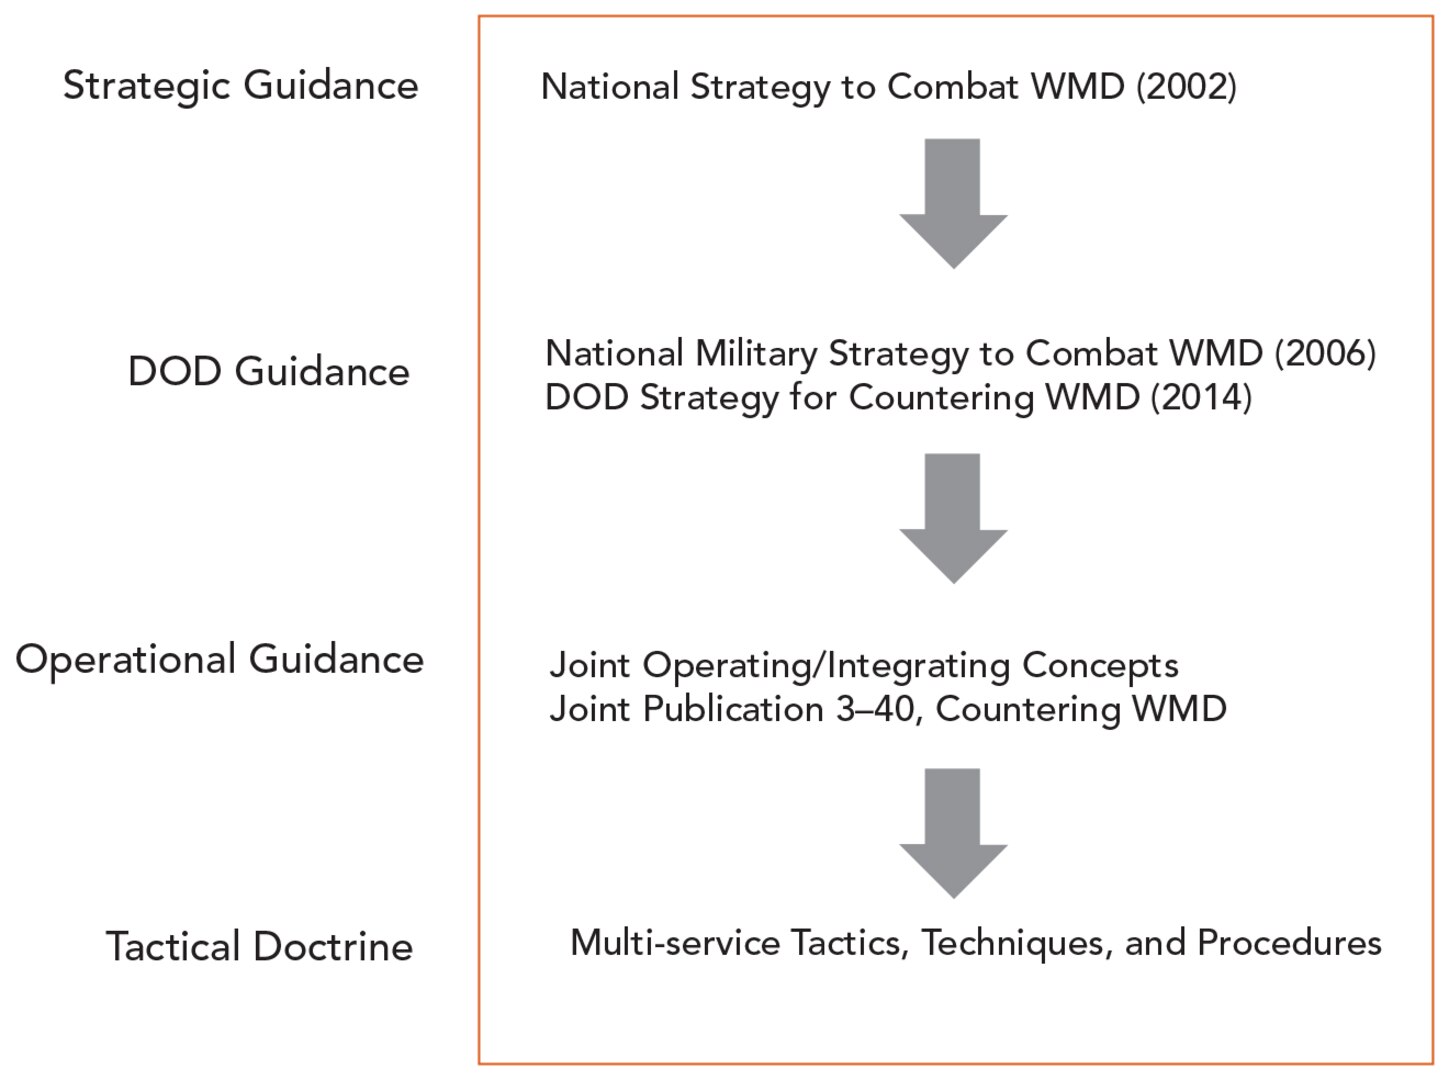 Figure 2: Strategic and Operational Guidance on CWMD